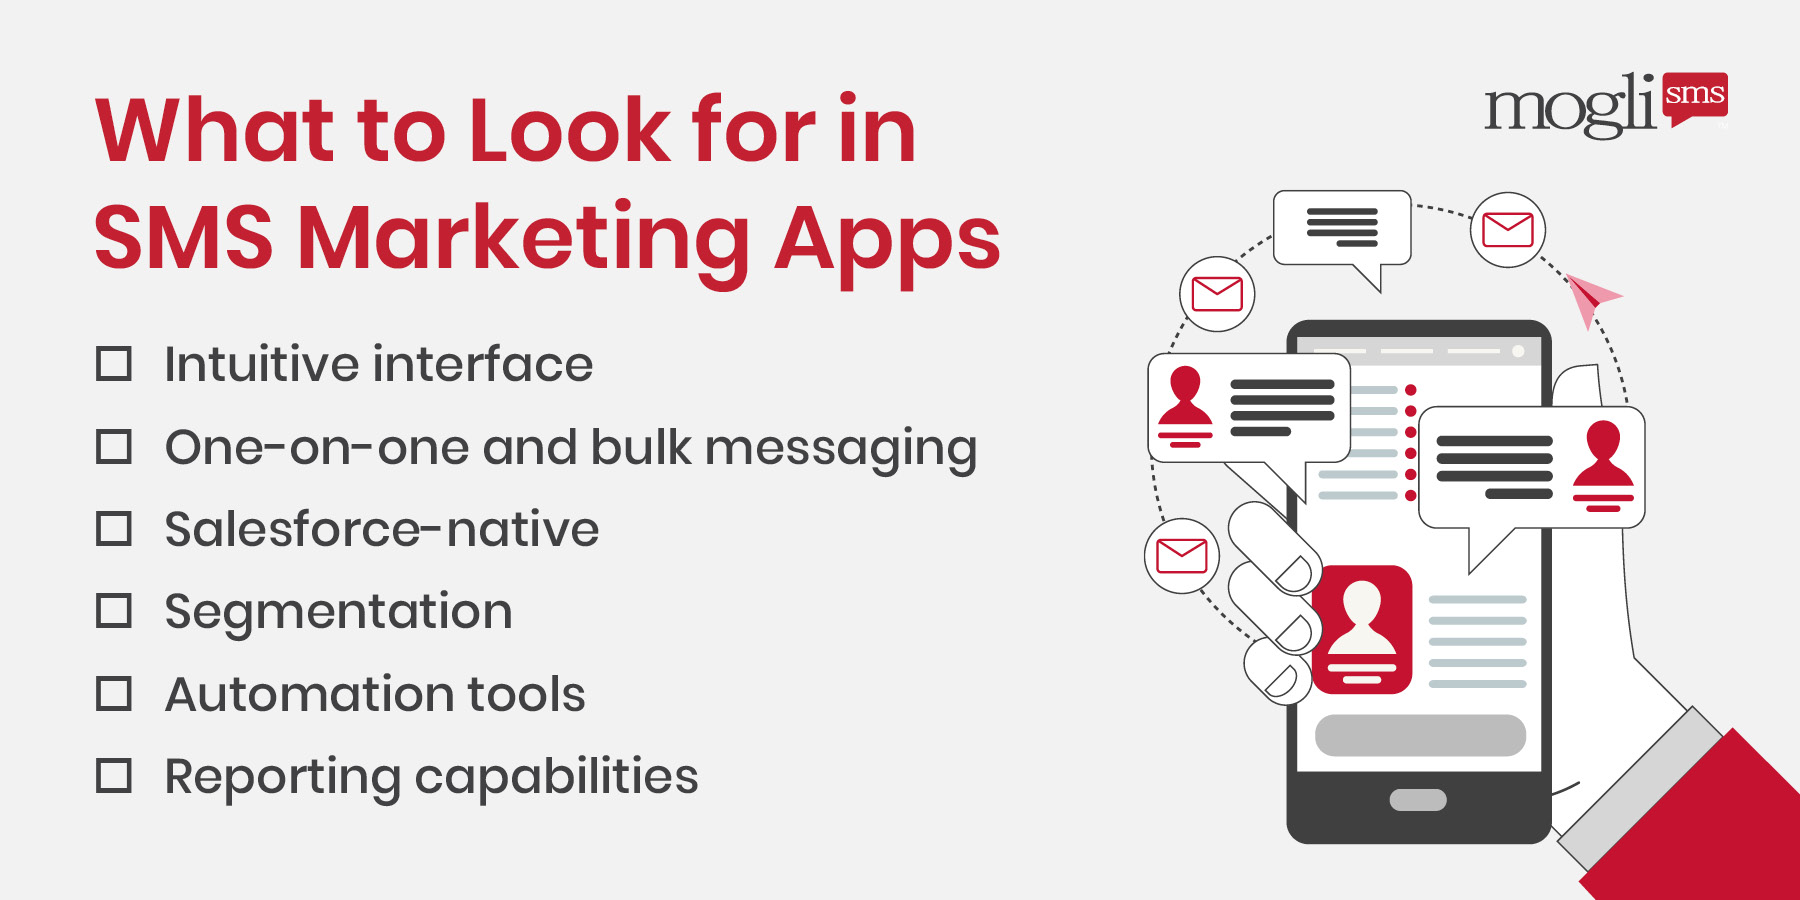 This image and the text below list the most important features to look for in the best SMS marketing apps.